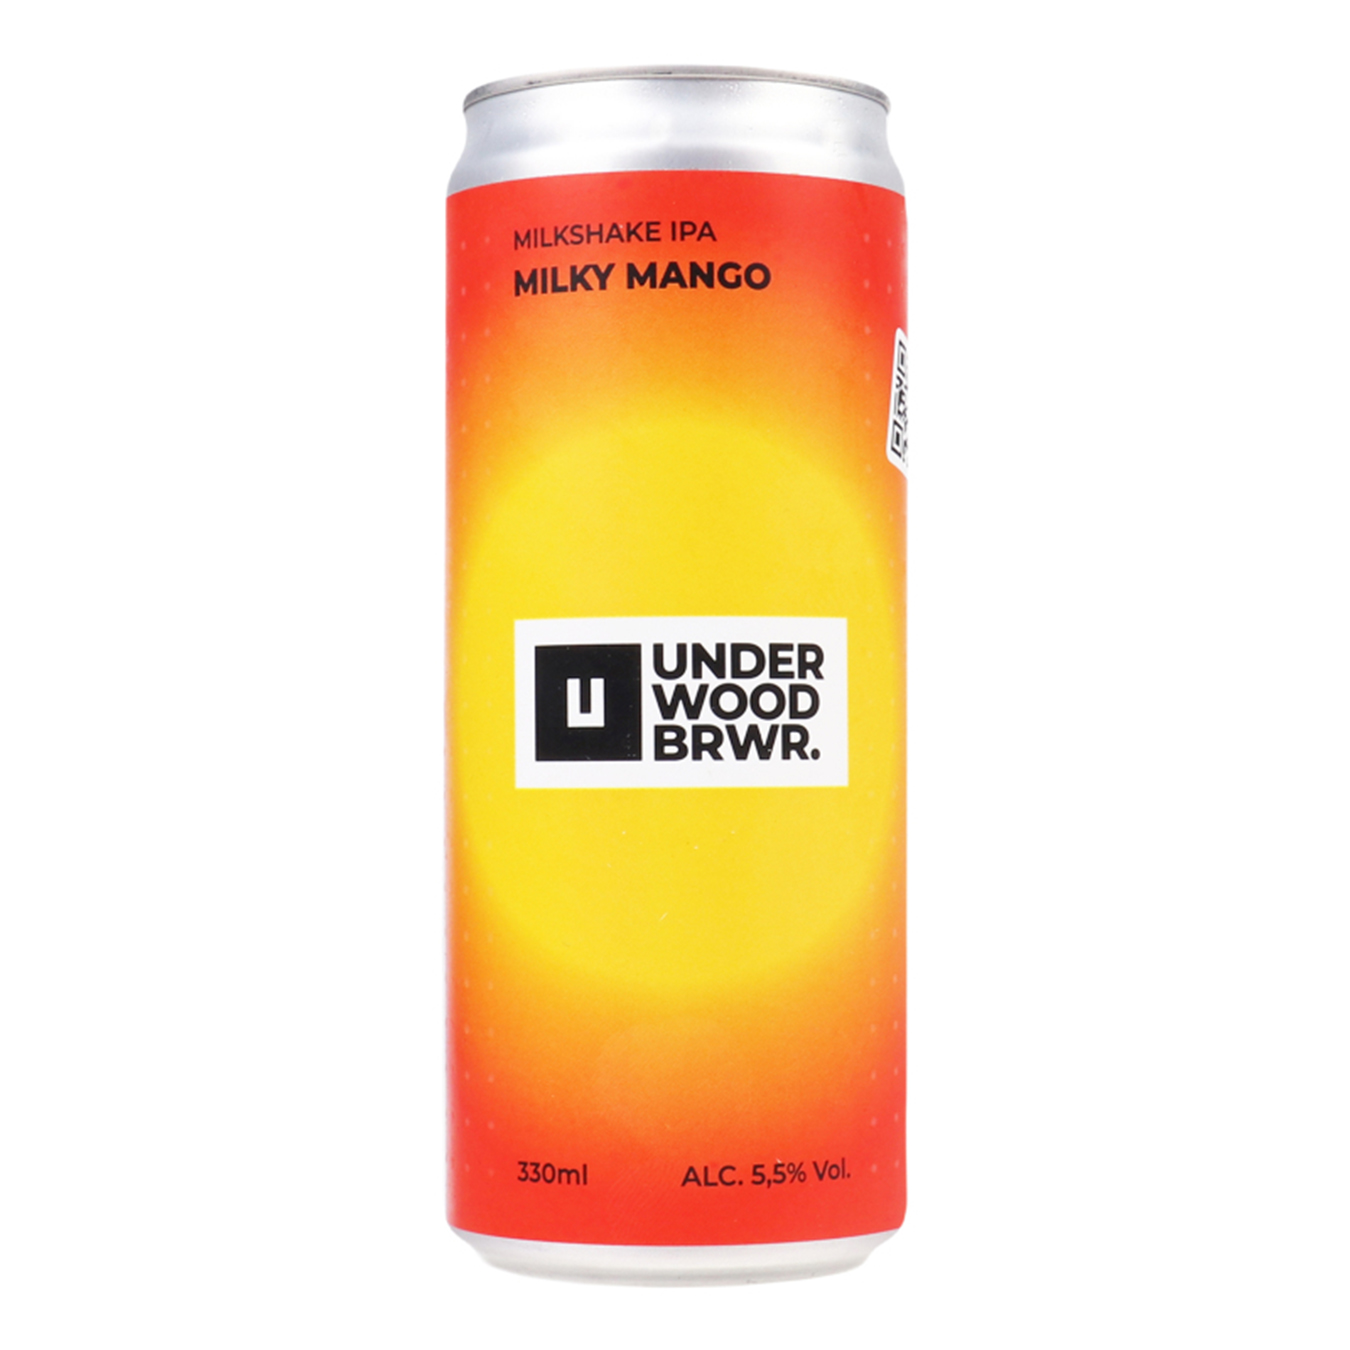 Light beer Underwood BREWERY Milky Mango 5% 0.33l iron can